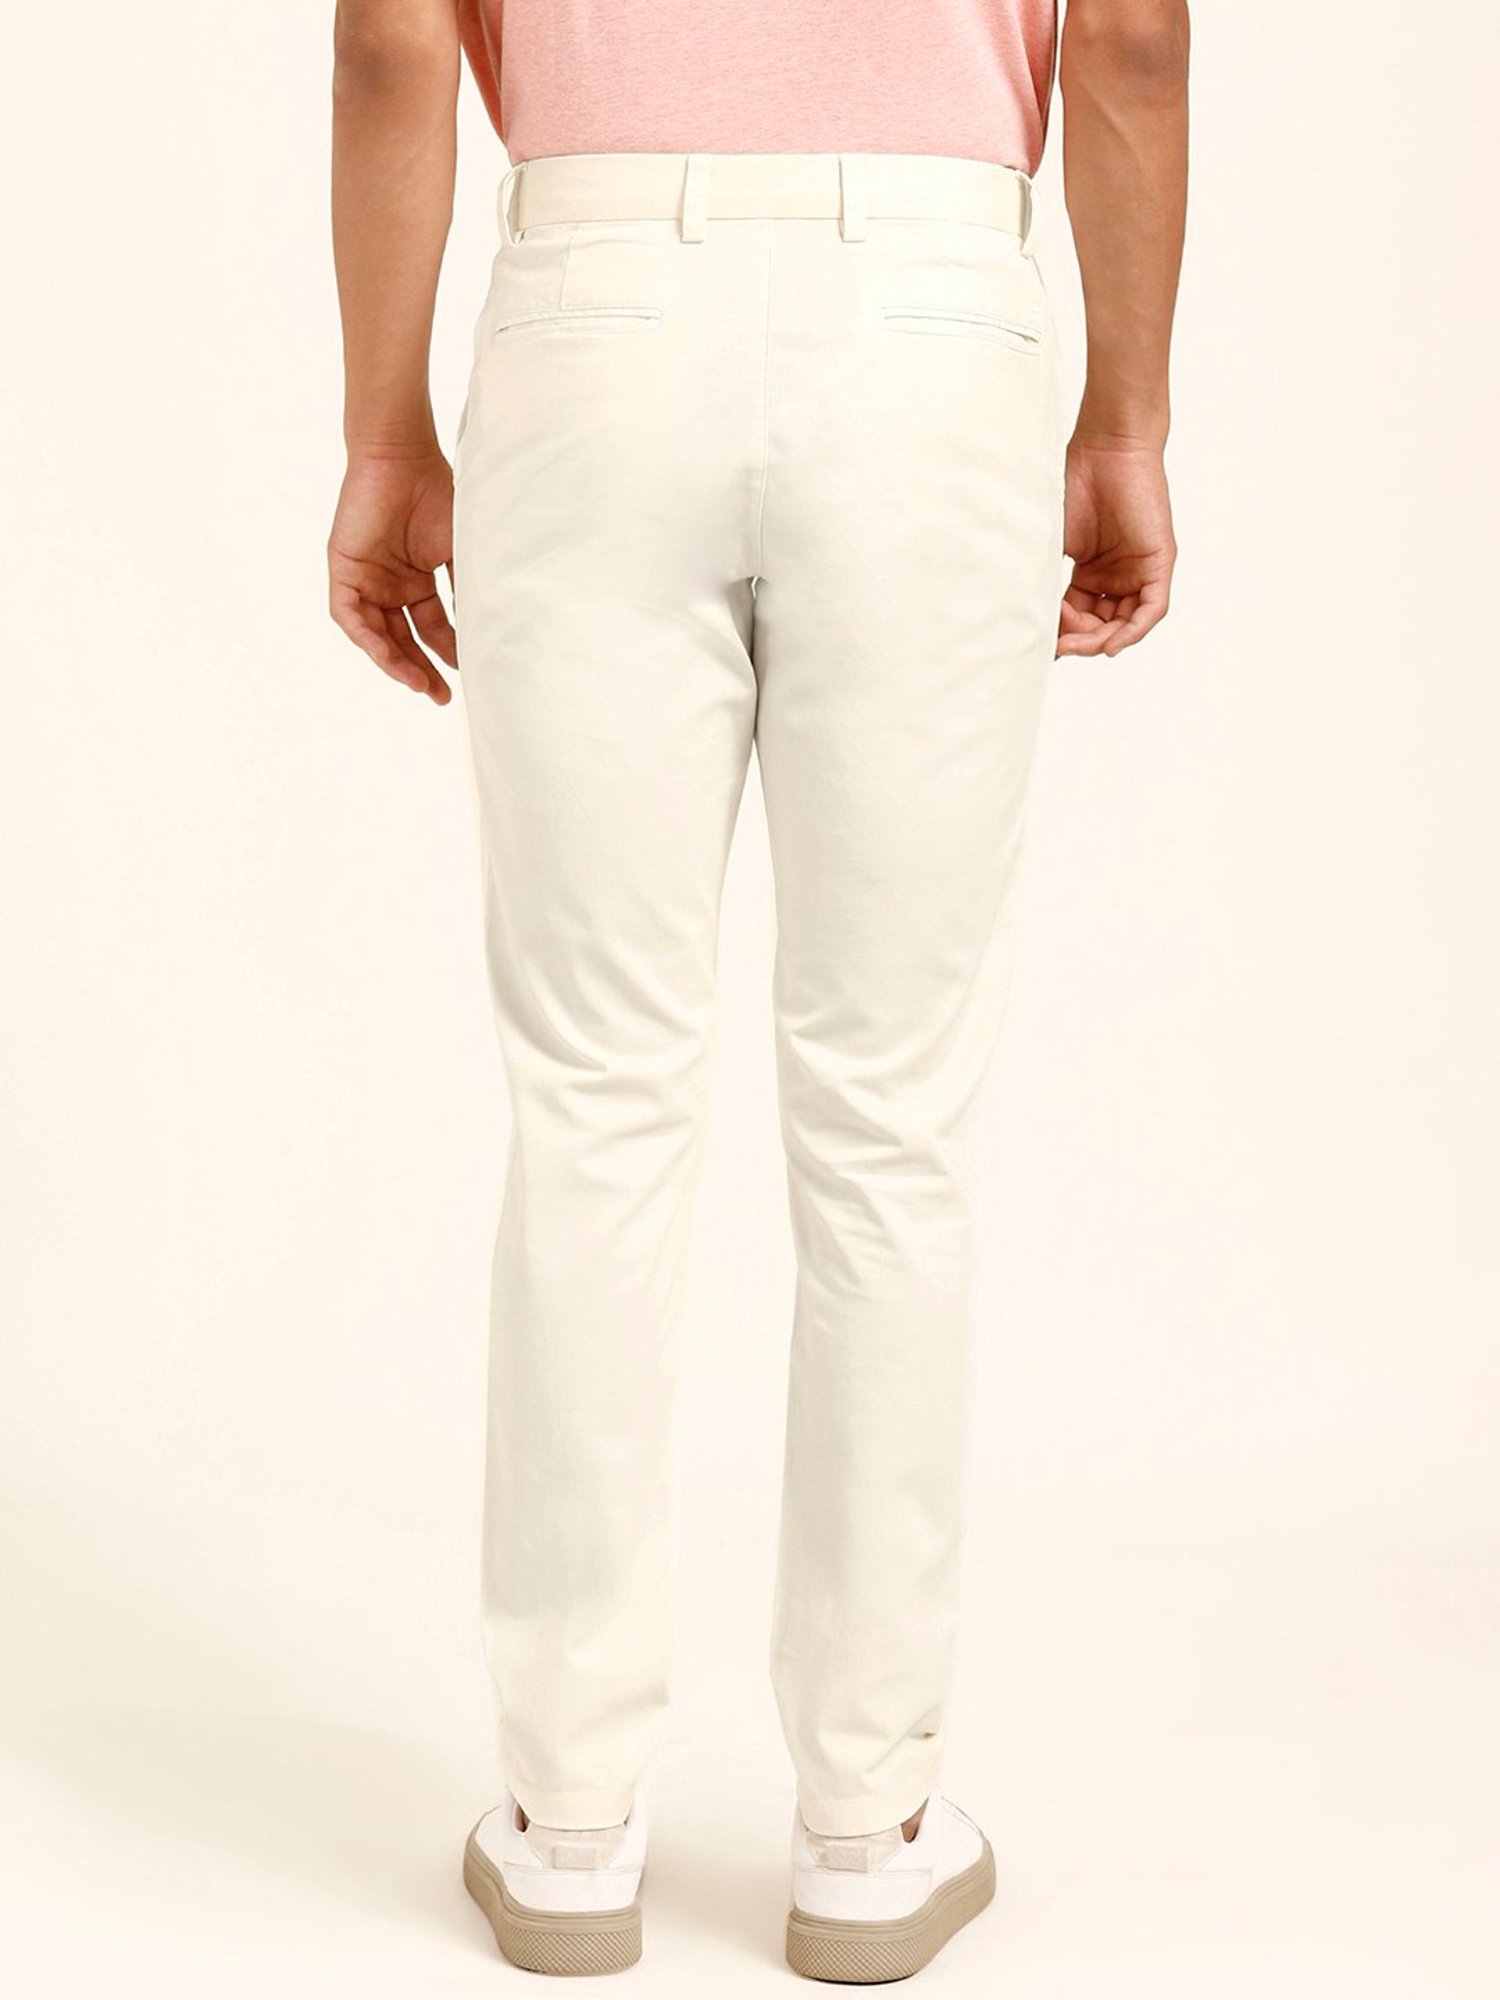 Men's Slim Fit Comfort-First Knockabout Chino Pants | Lands' End